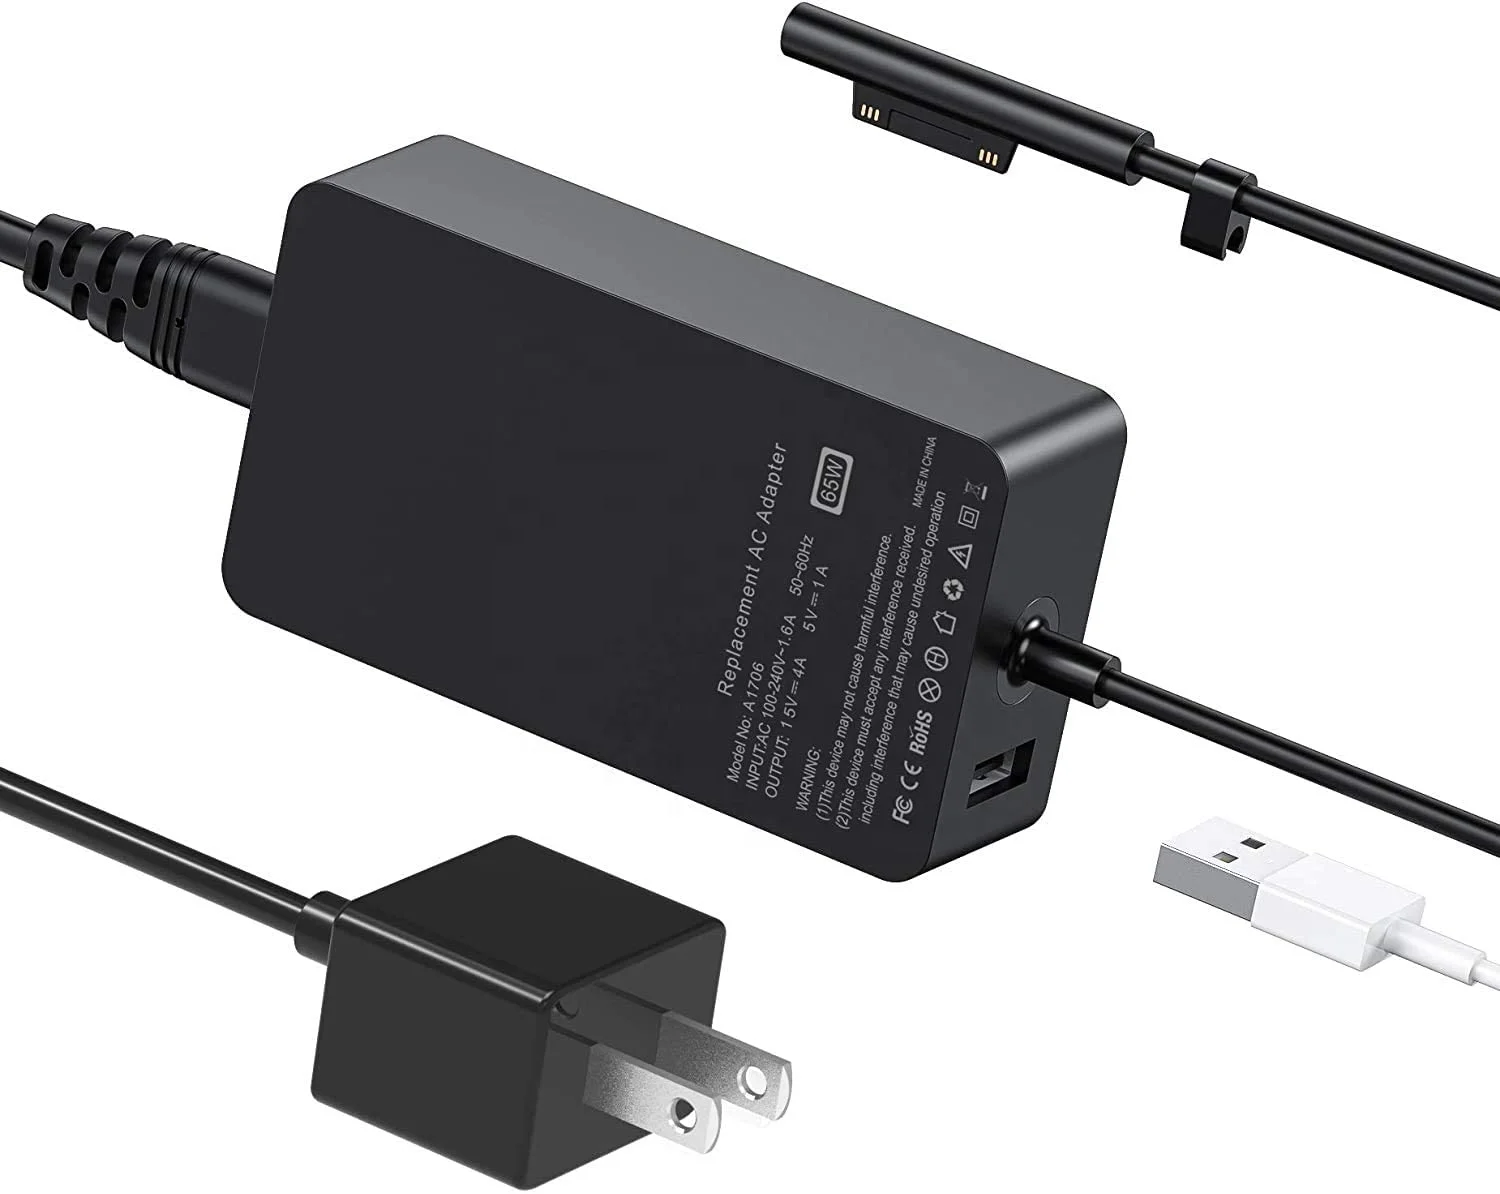 

Amazon hot 36W 44W 65W 102W for Microsoft Surface Pro Charger 65W compatible with Surface Pro 3/4/5/6/7 Power Supply Adapter, Black